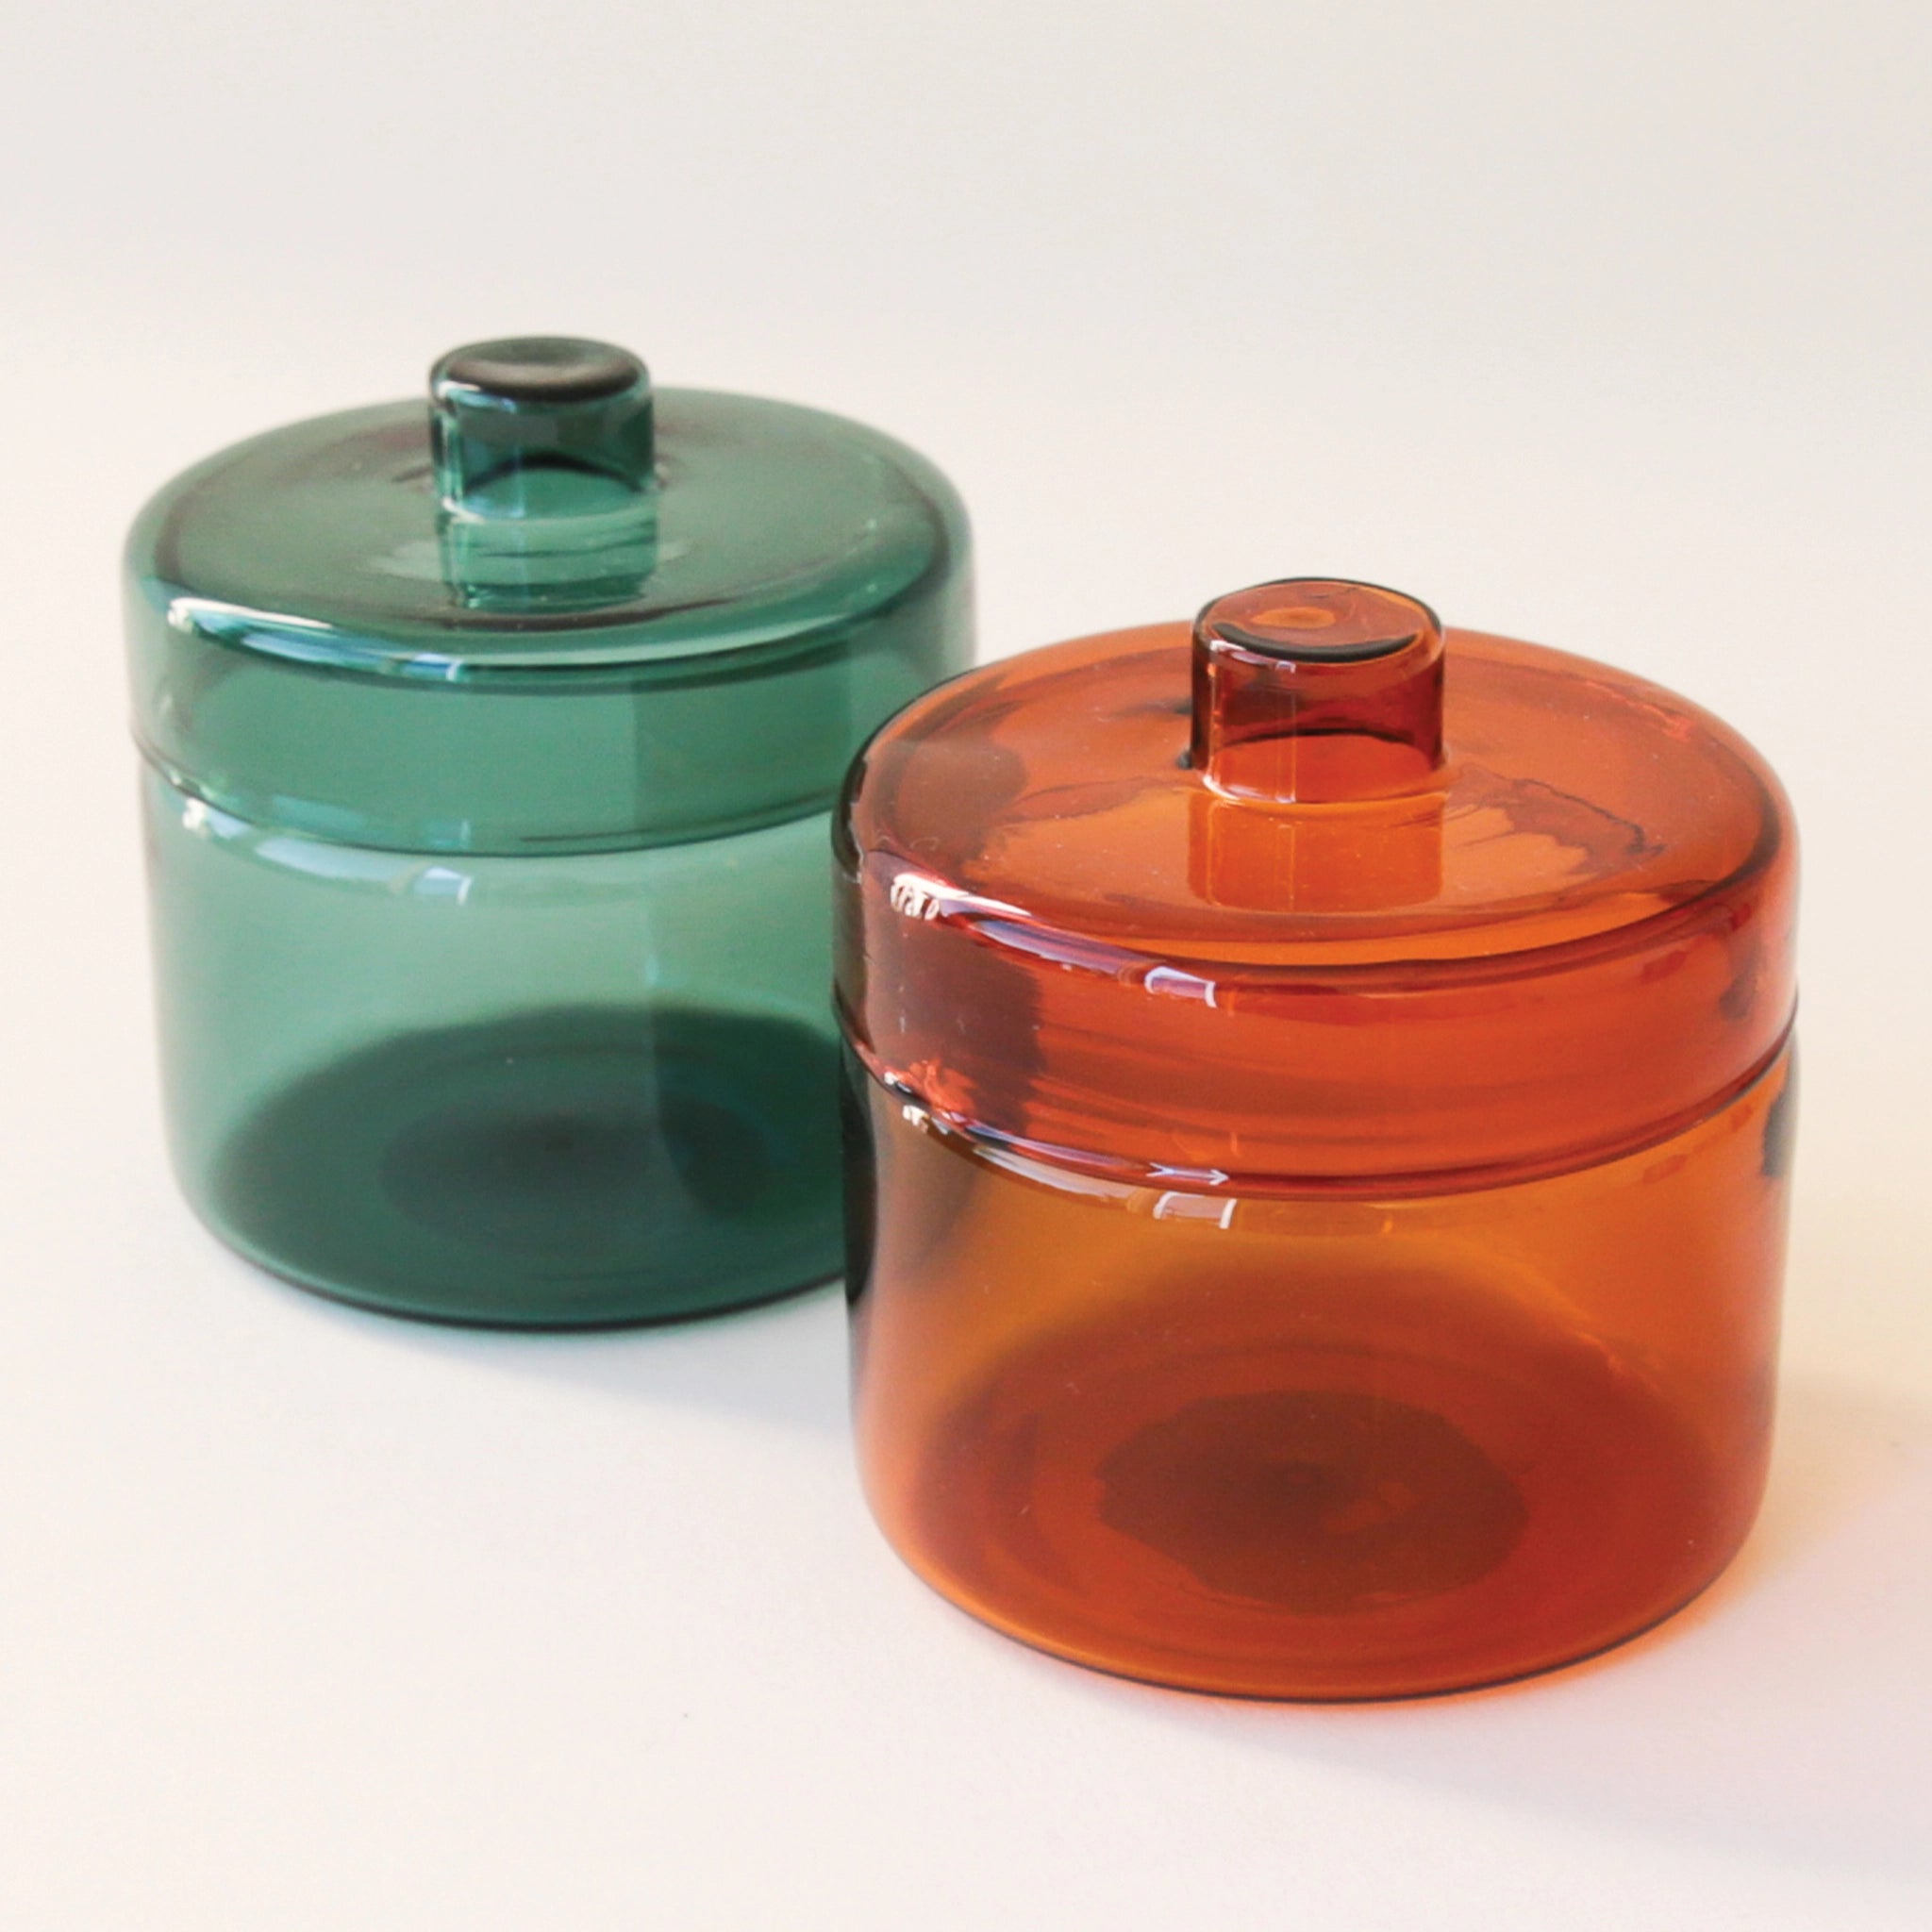 A round glass teal jar with a coordinating glass lid and a round but flat knob on top photographed here next to the same glass jar in a different burnt orange color way.